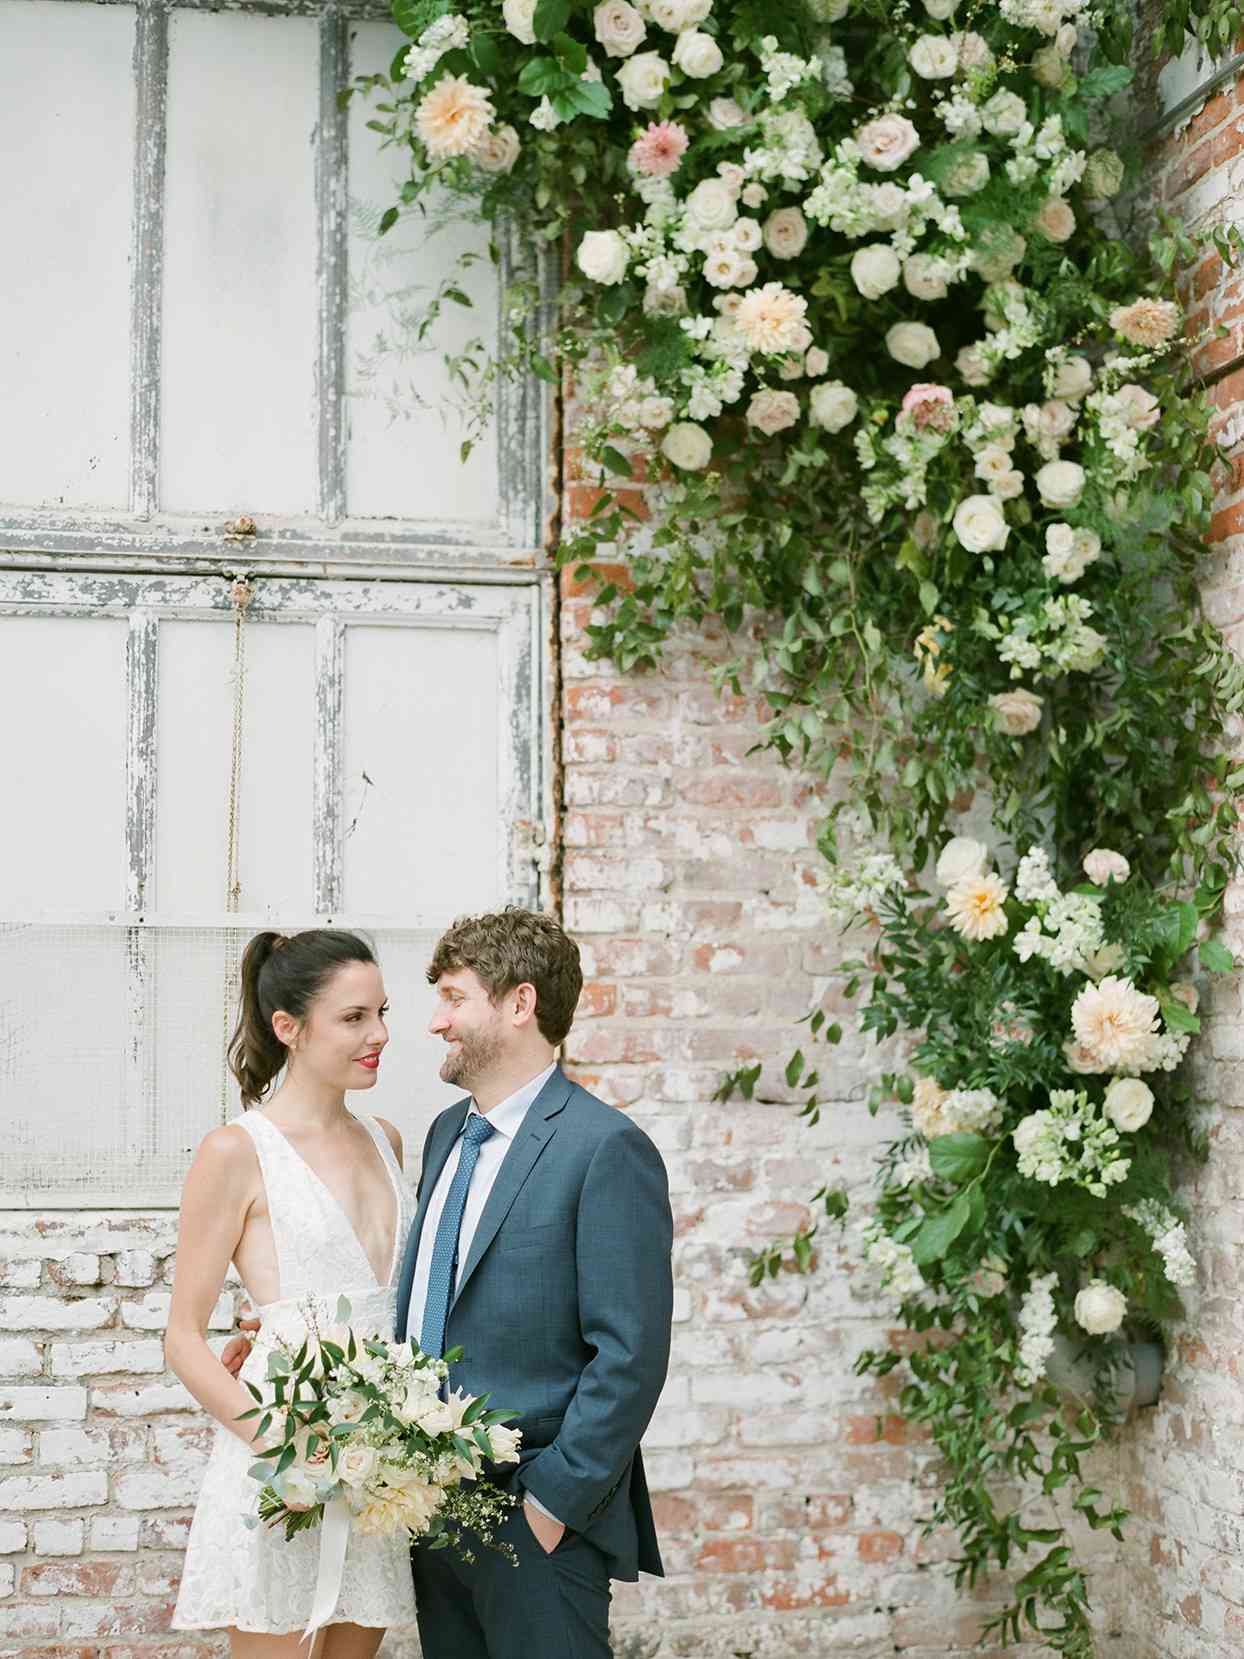 Wedding couple standing in front of brick wall with flowers